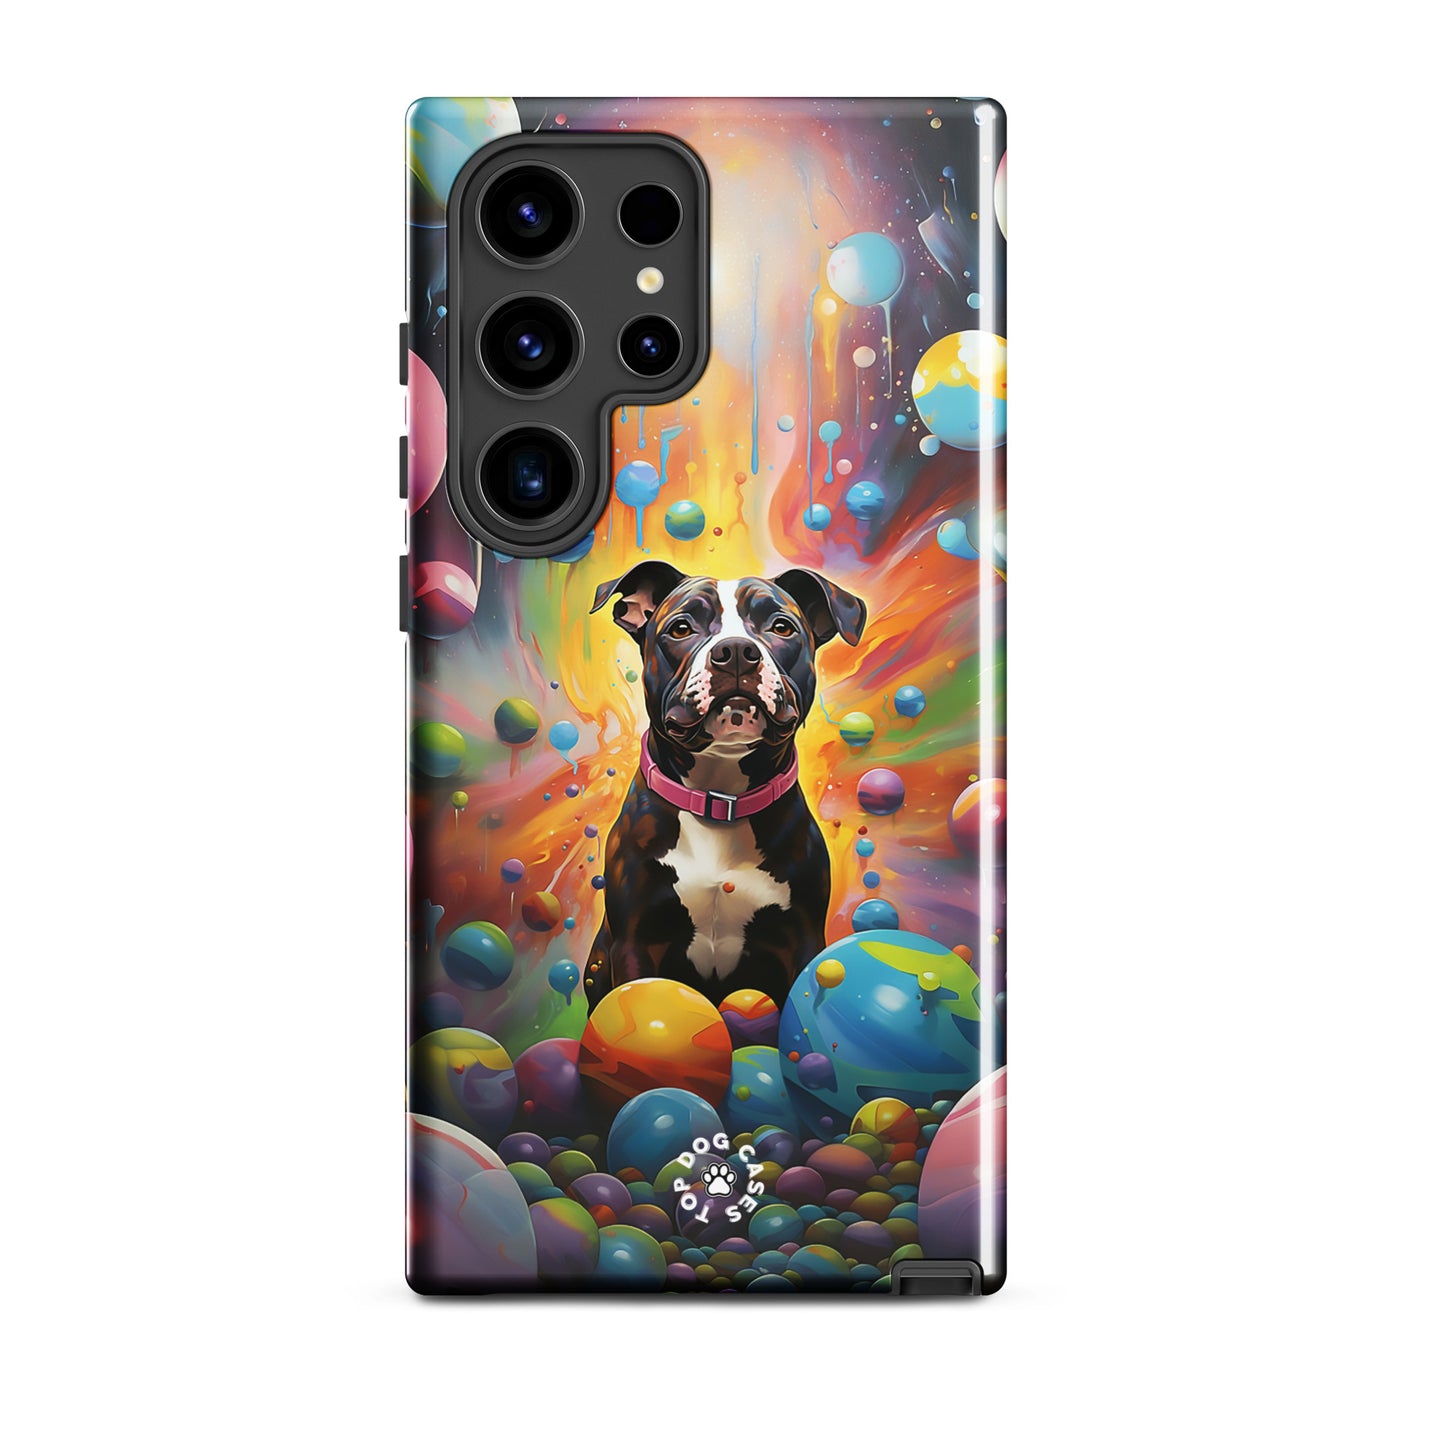 Pitbull - Samsung Phone Case - Aesthetic Phone Cases - Top Dog Cases - #CuteDog, #CuteDogs, #DogInSpace, #DogPhoneCase, #Pitbull, #Samsung, #SamsungGalaxy, #SamsungGalaxyCase, #SamsungGalaxyS10, #SamsungGalaxyS20, #SamsungGalaxyS21, #SamsungGalaxyS22, #SamsungGalaxyS22Ultra, #SamsungGalaxyS23, #SamsungGalaxyS23Plus, #SamsungGalaxyS23Ultra, #SamsungPhoneCase, SamsungGalaxyS20Plus, SamsungGalaxyS22Plus, SamsungGalaxyS24, SamsungGalaxyS24plus, SamsungGalaxyS24Ultra